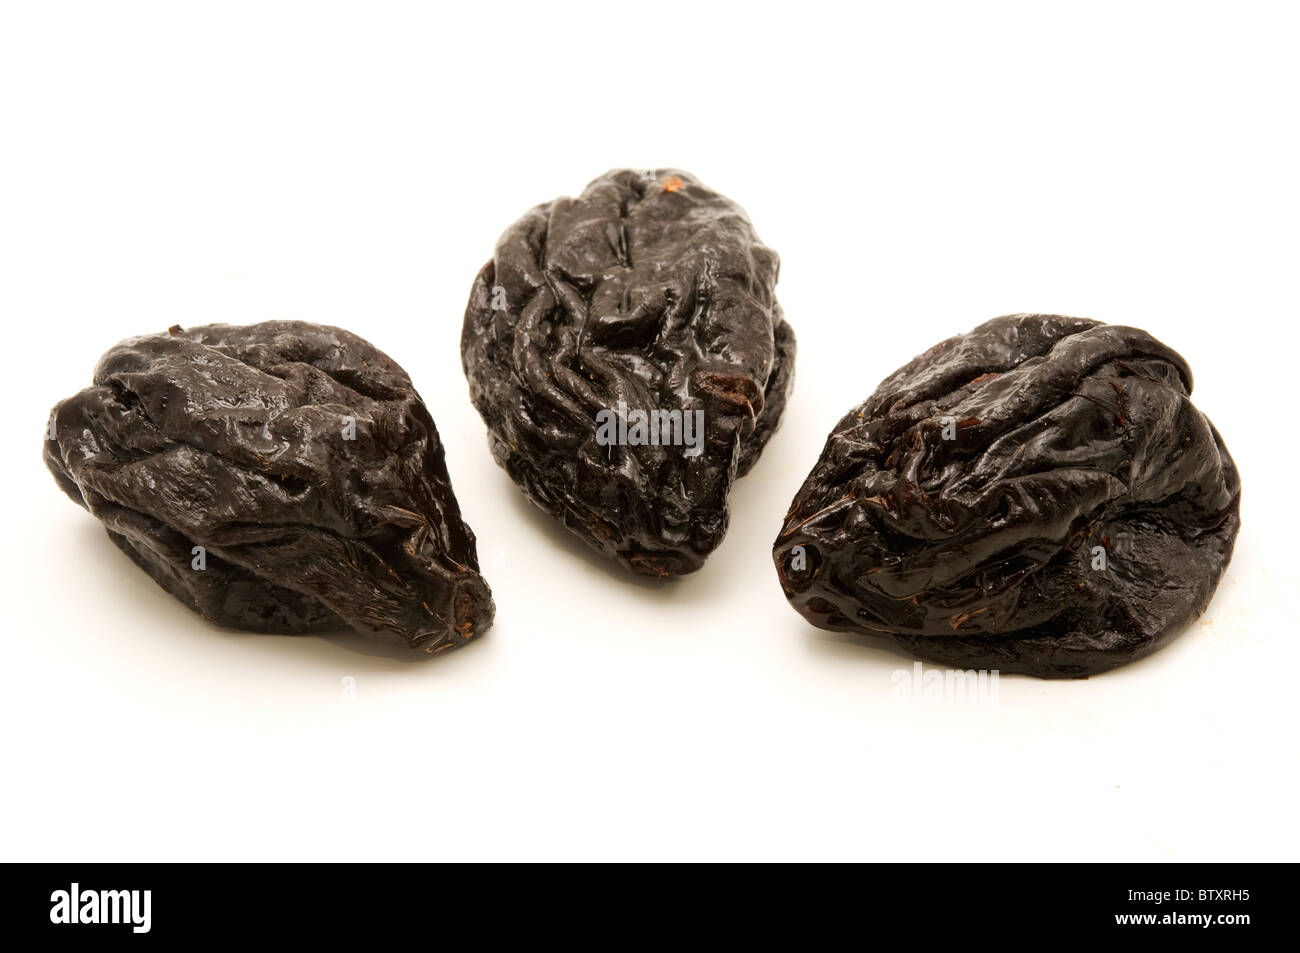 Dried plums on a white background Stock Photo